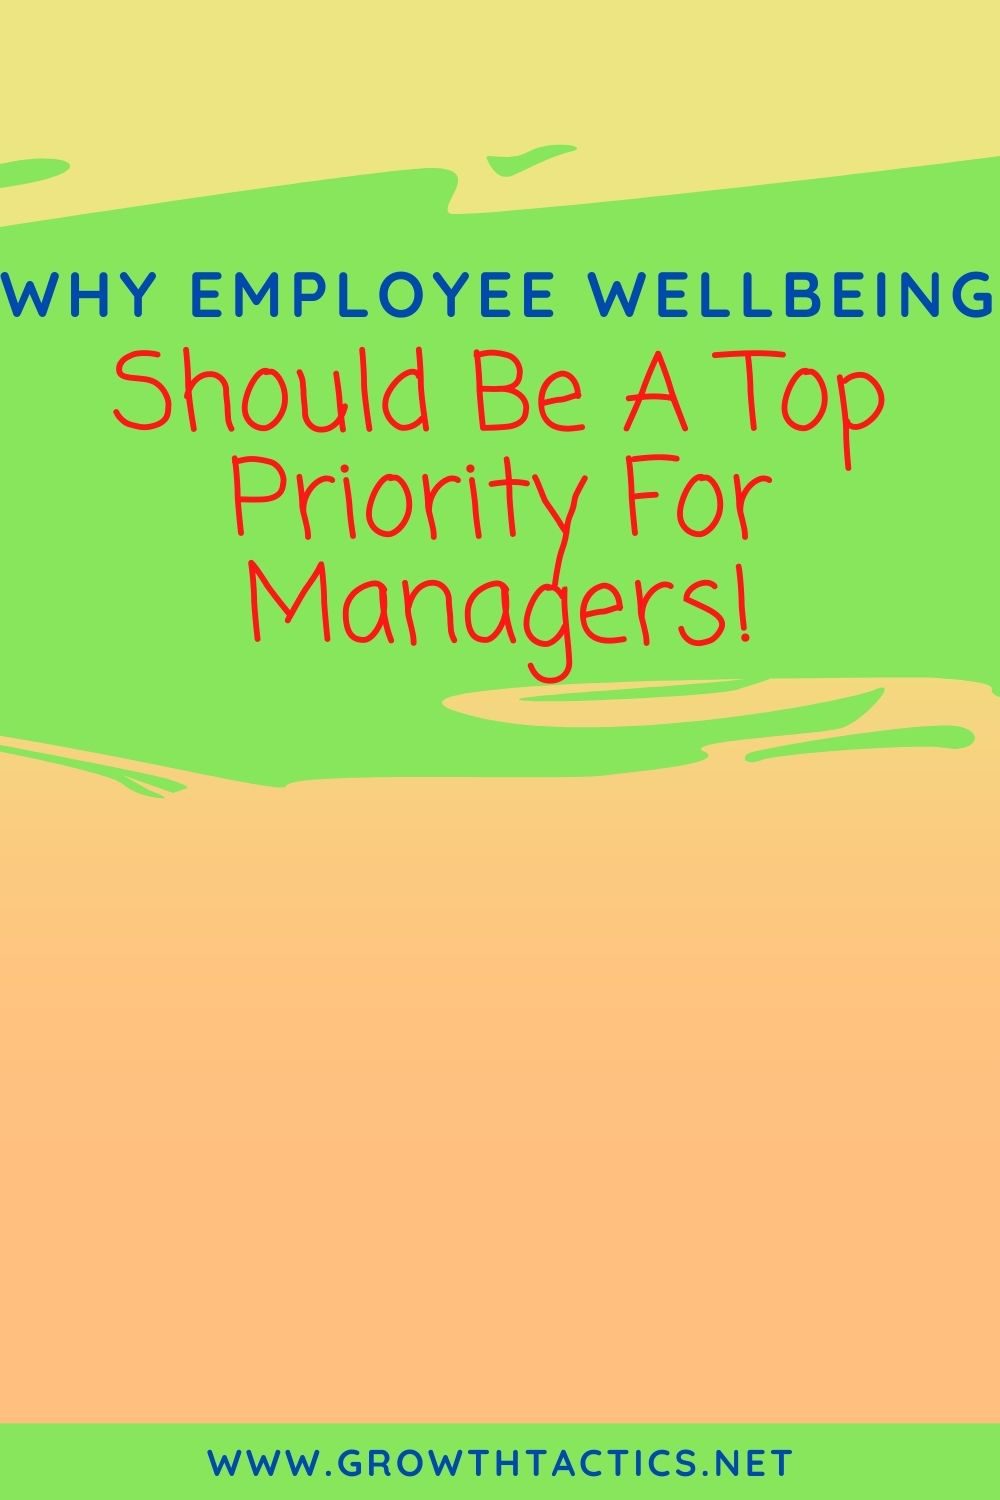 Why Employee Wellbeing Should Be A Top Priority For Managers!